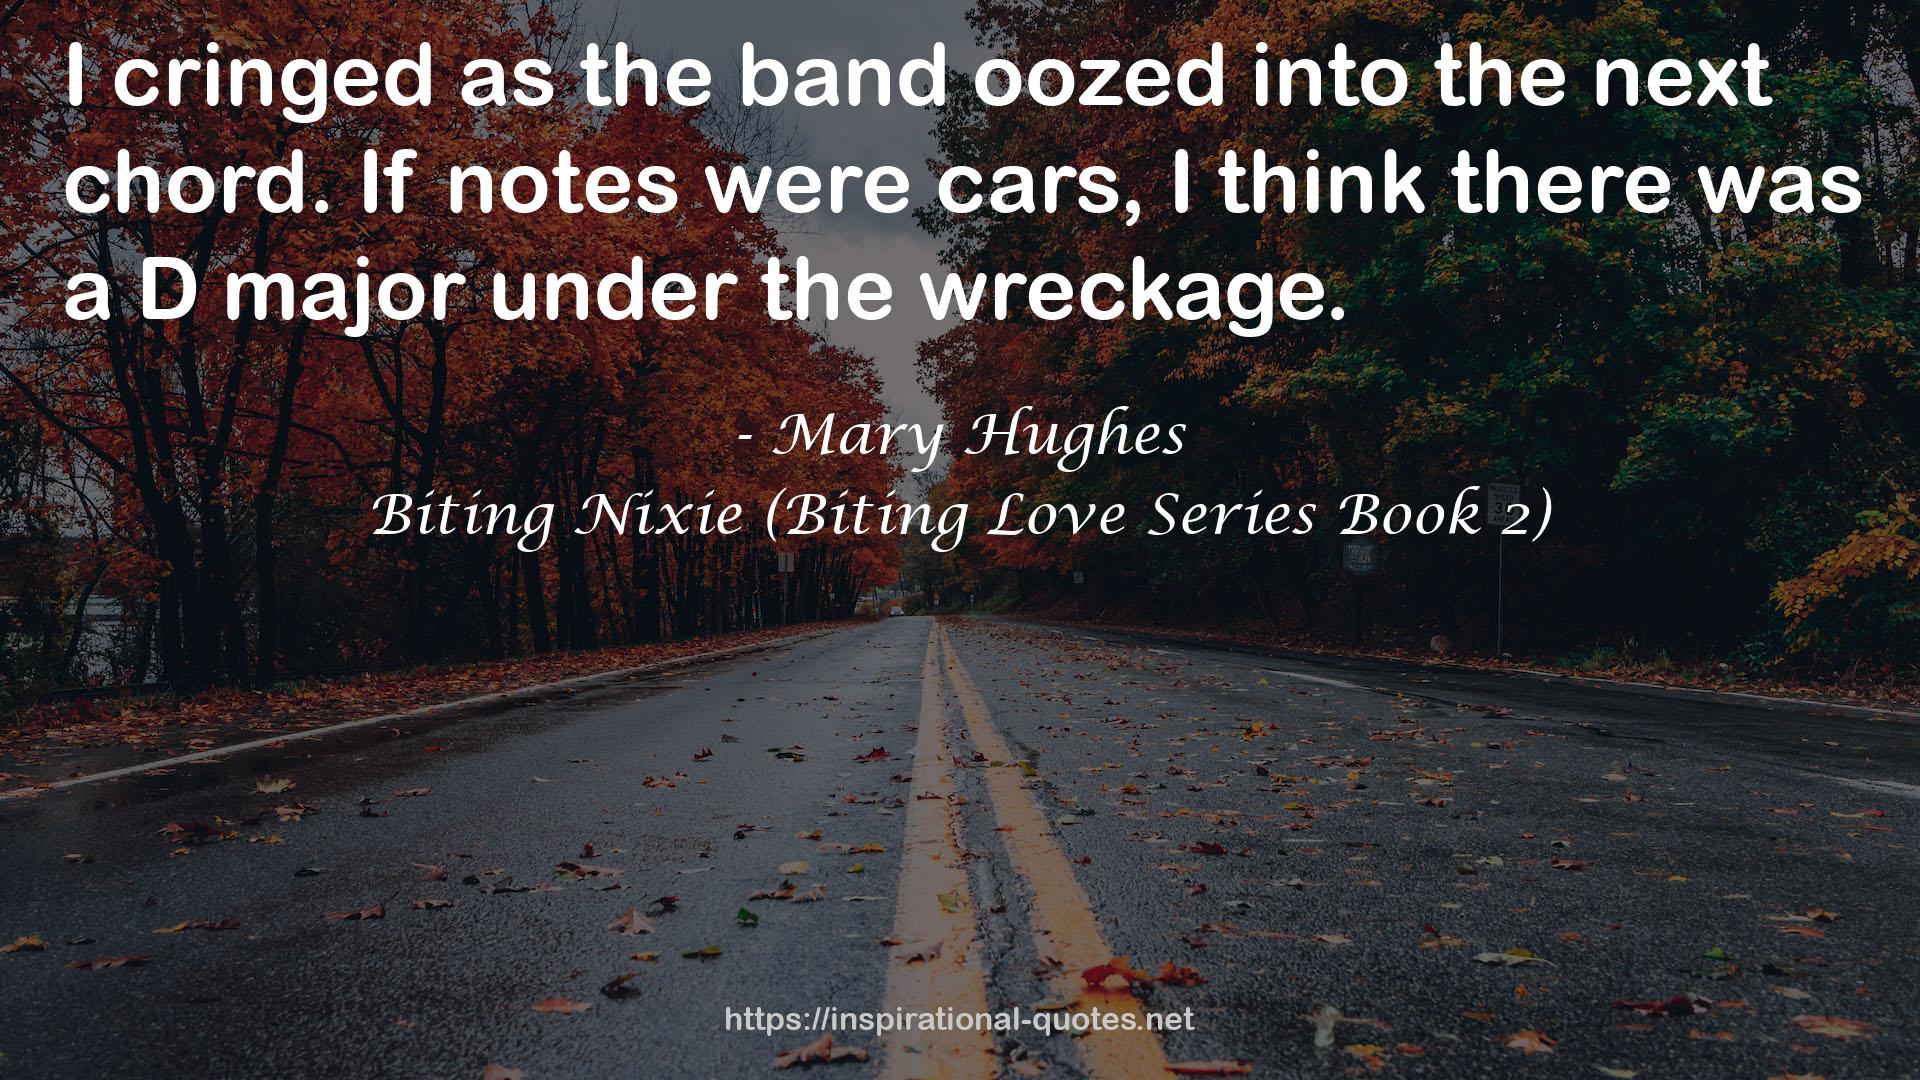 Biting Nixie (Biting Love Series Book 2) QUOTES